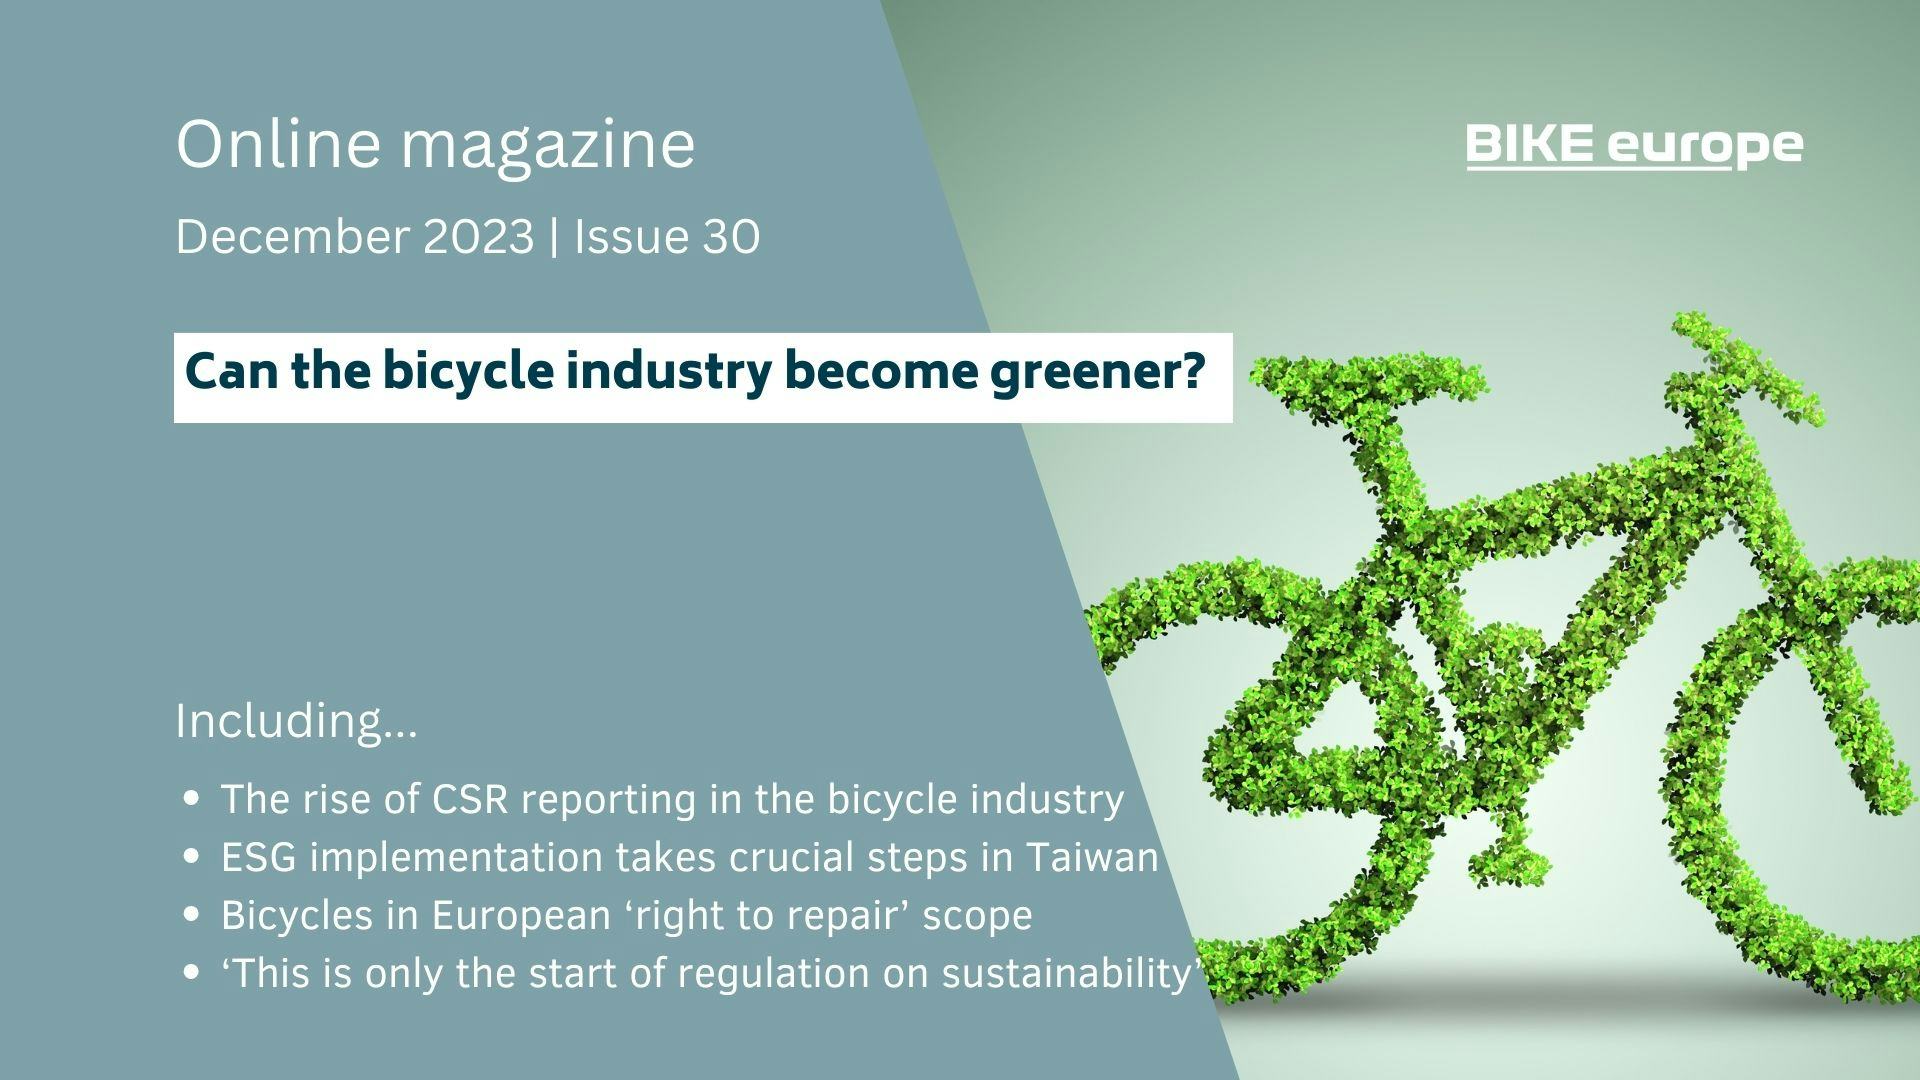 Can the bicycle industry become greener?